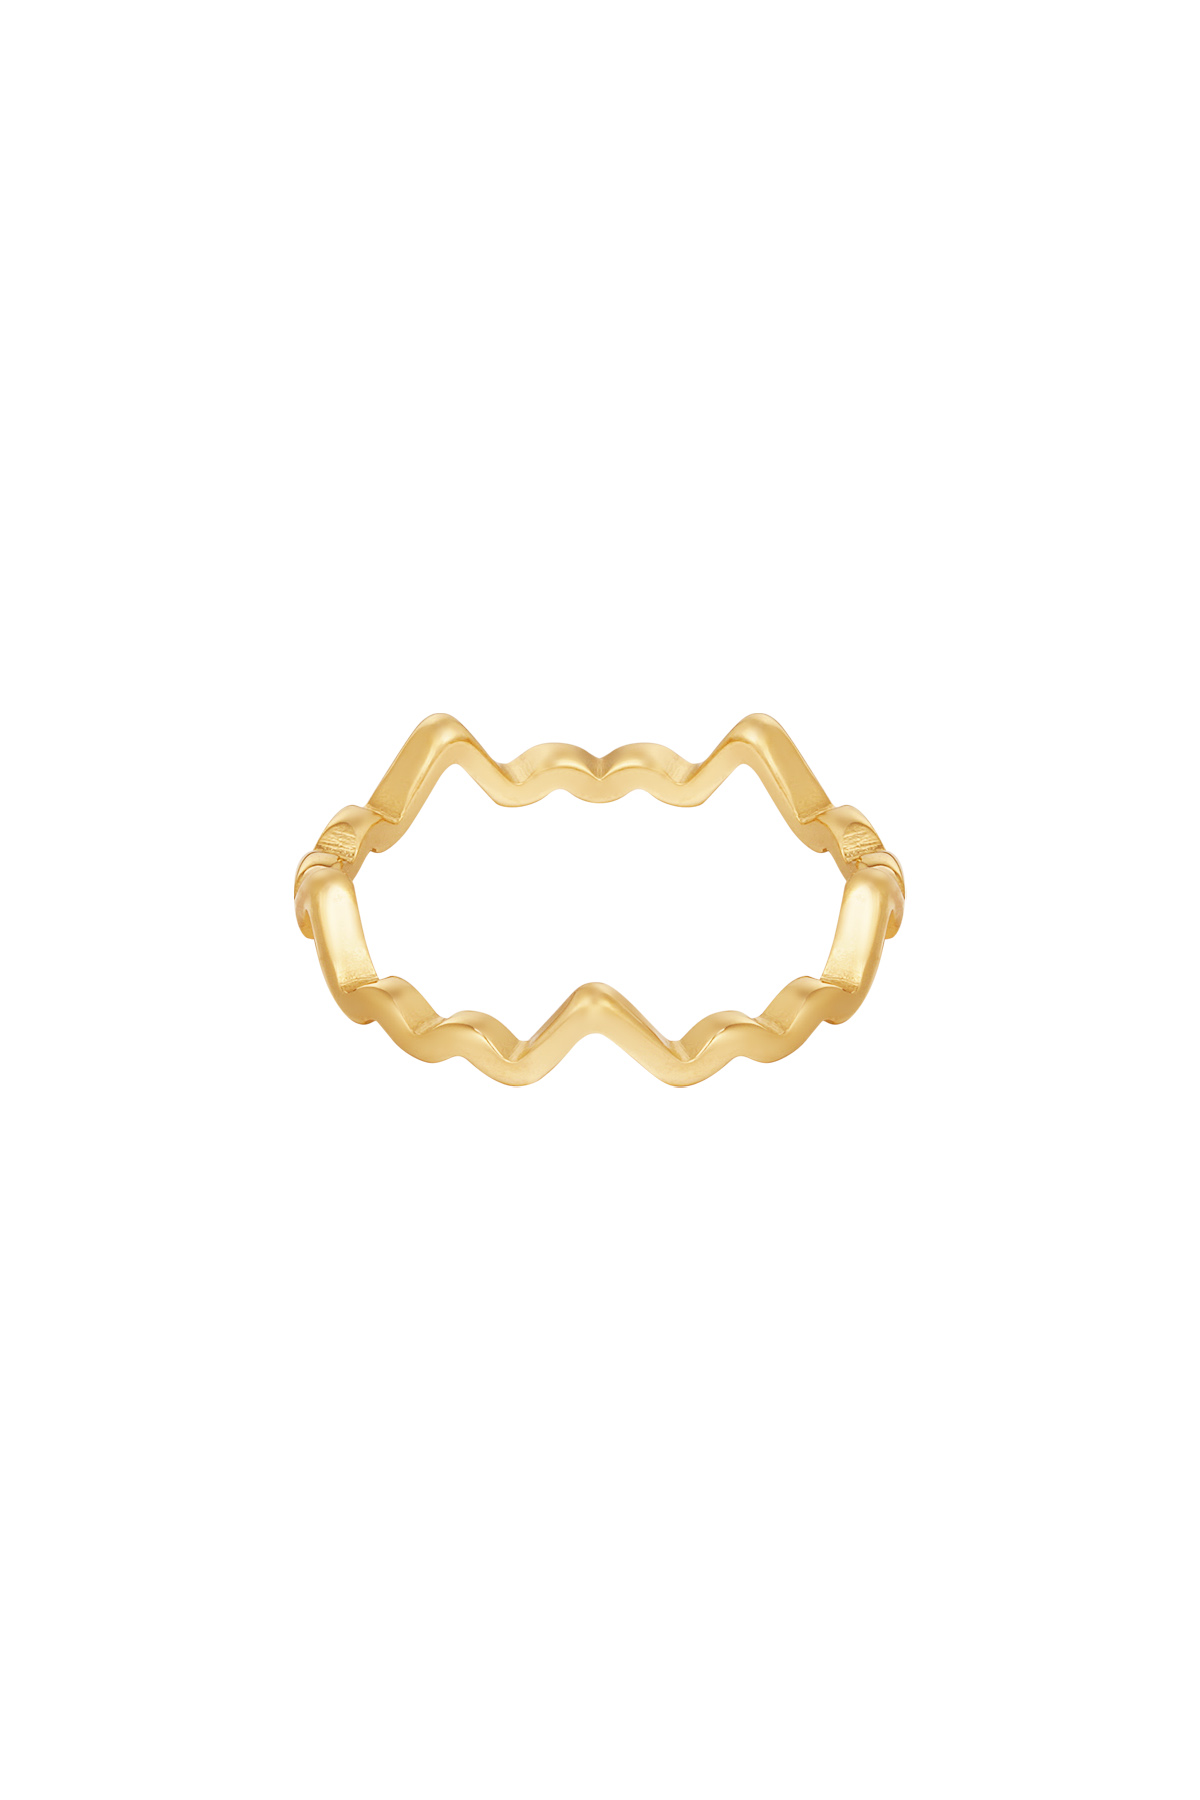 Ring aesthetic - gold h5 